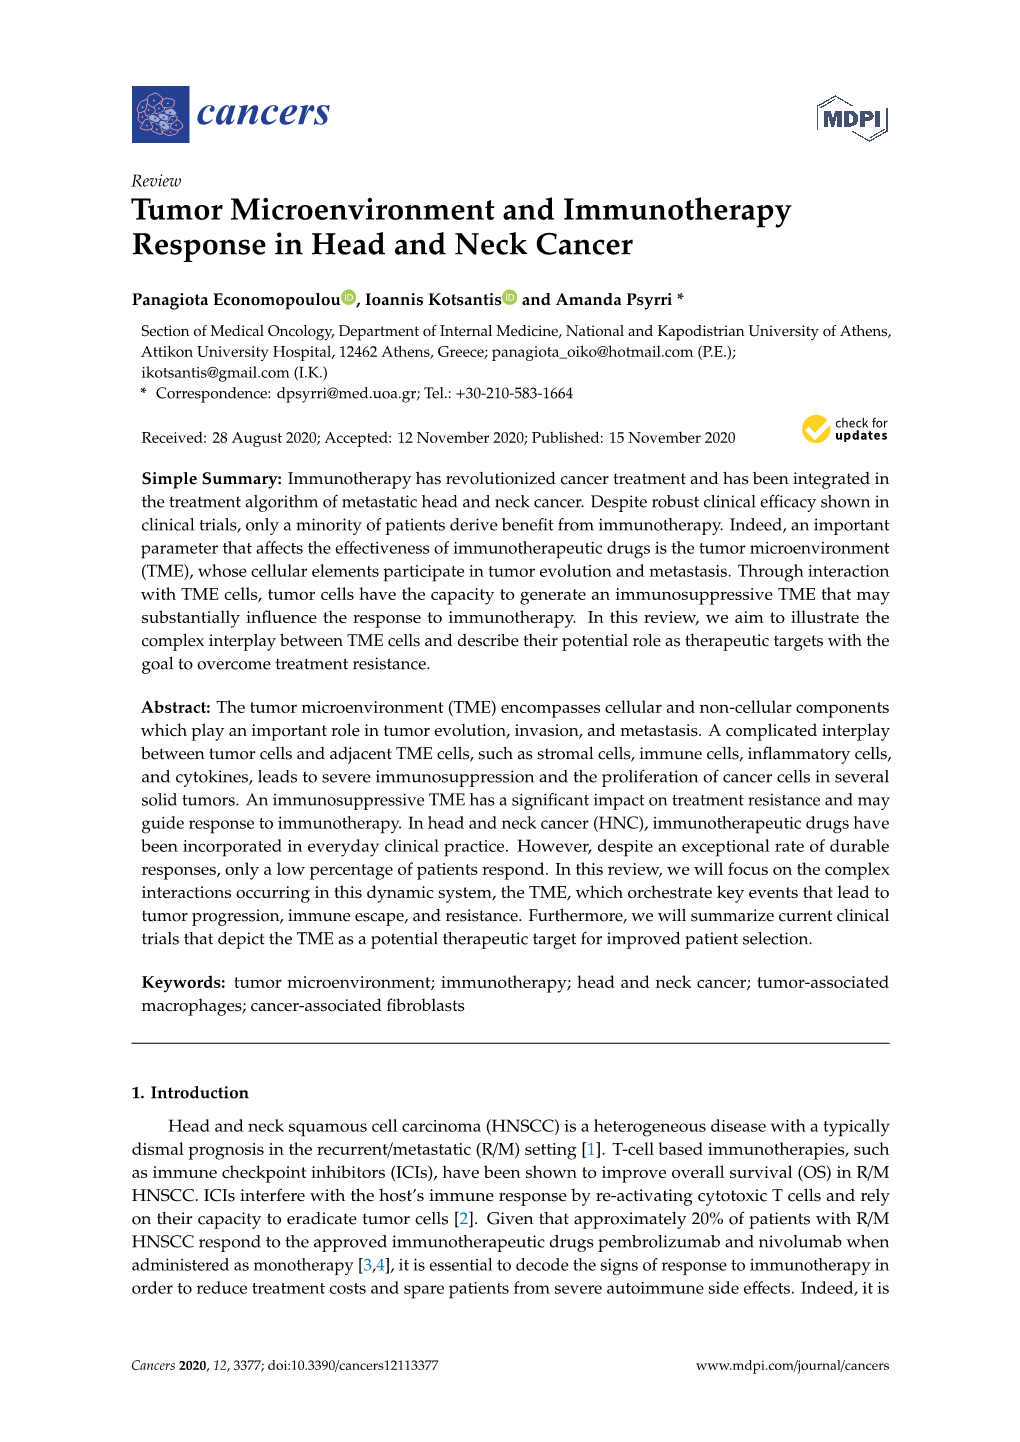 Tumor Microenvironment and Immunotherapy Response in Head and Neck Cancer